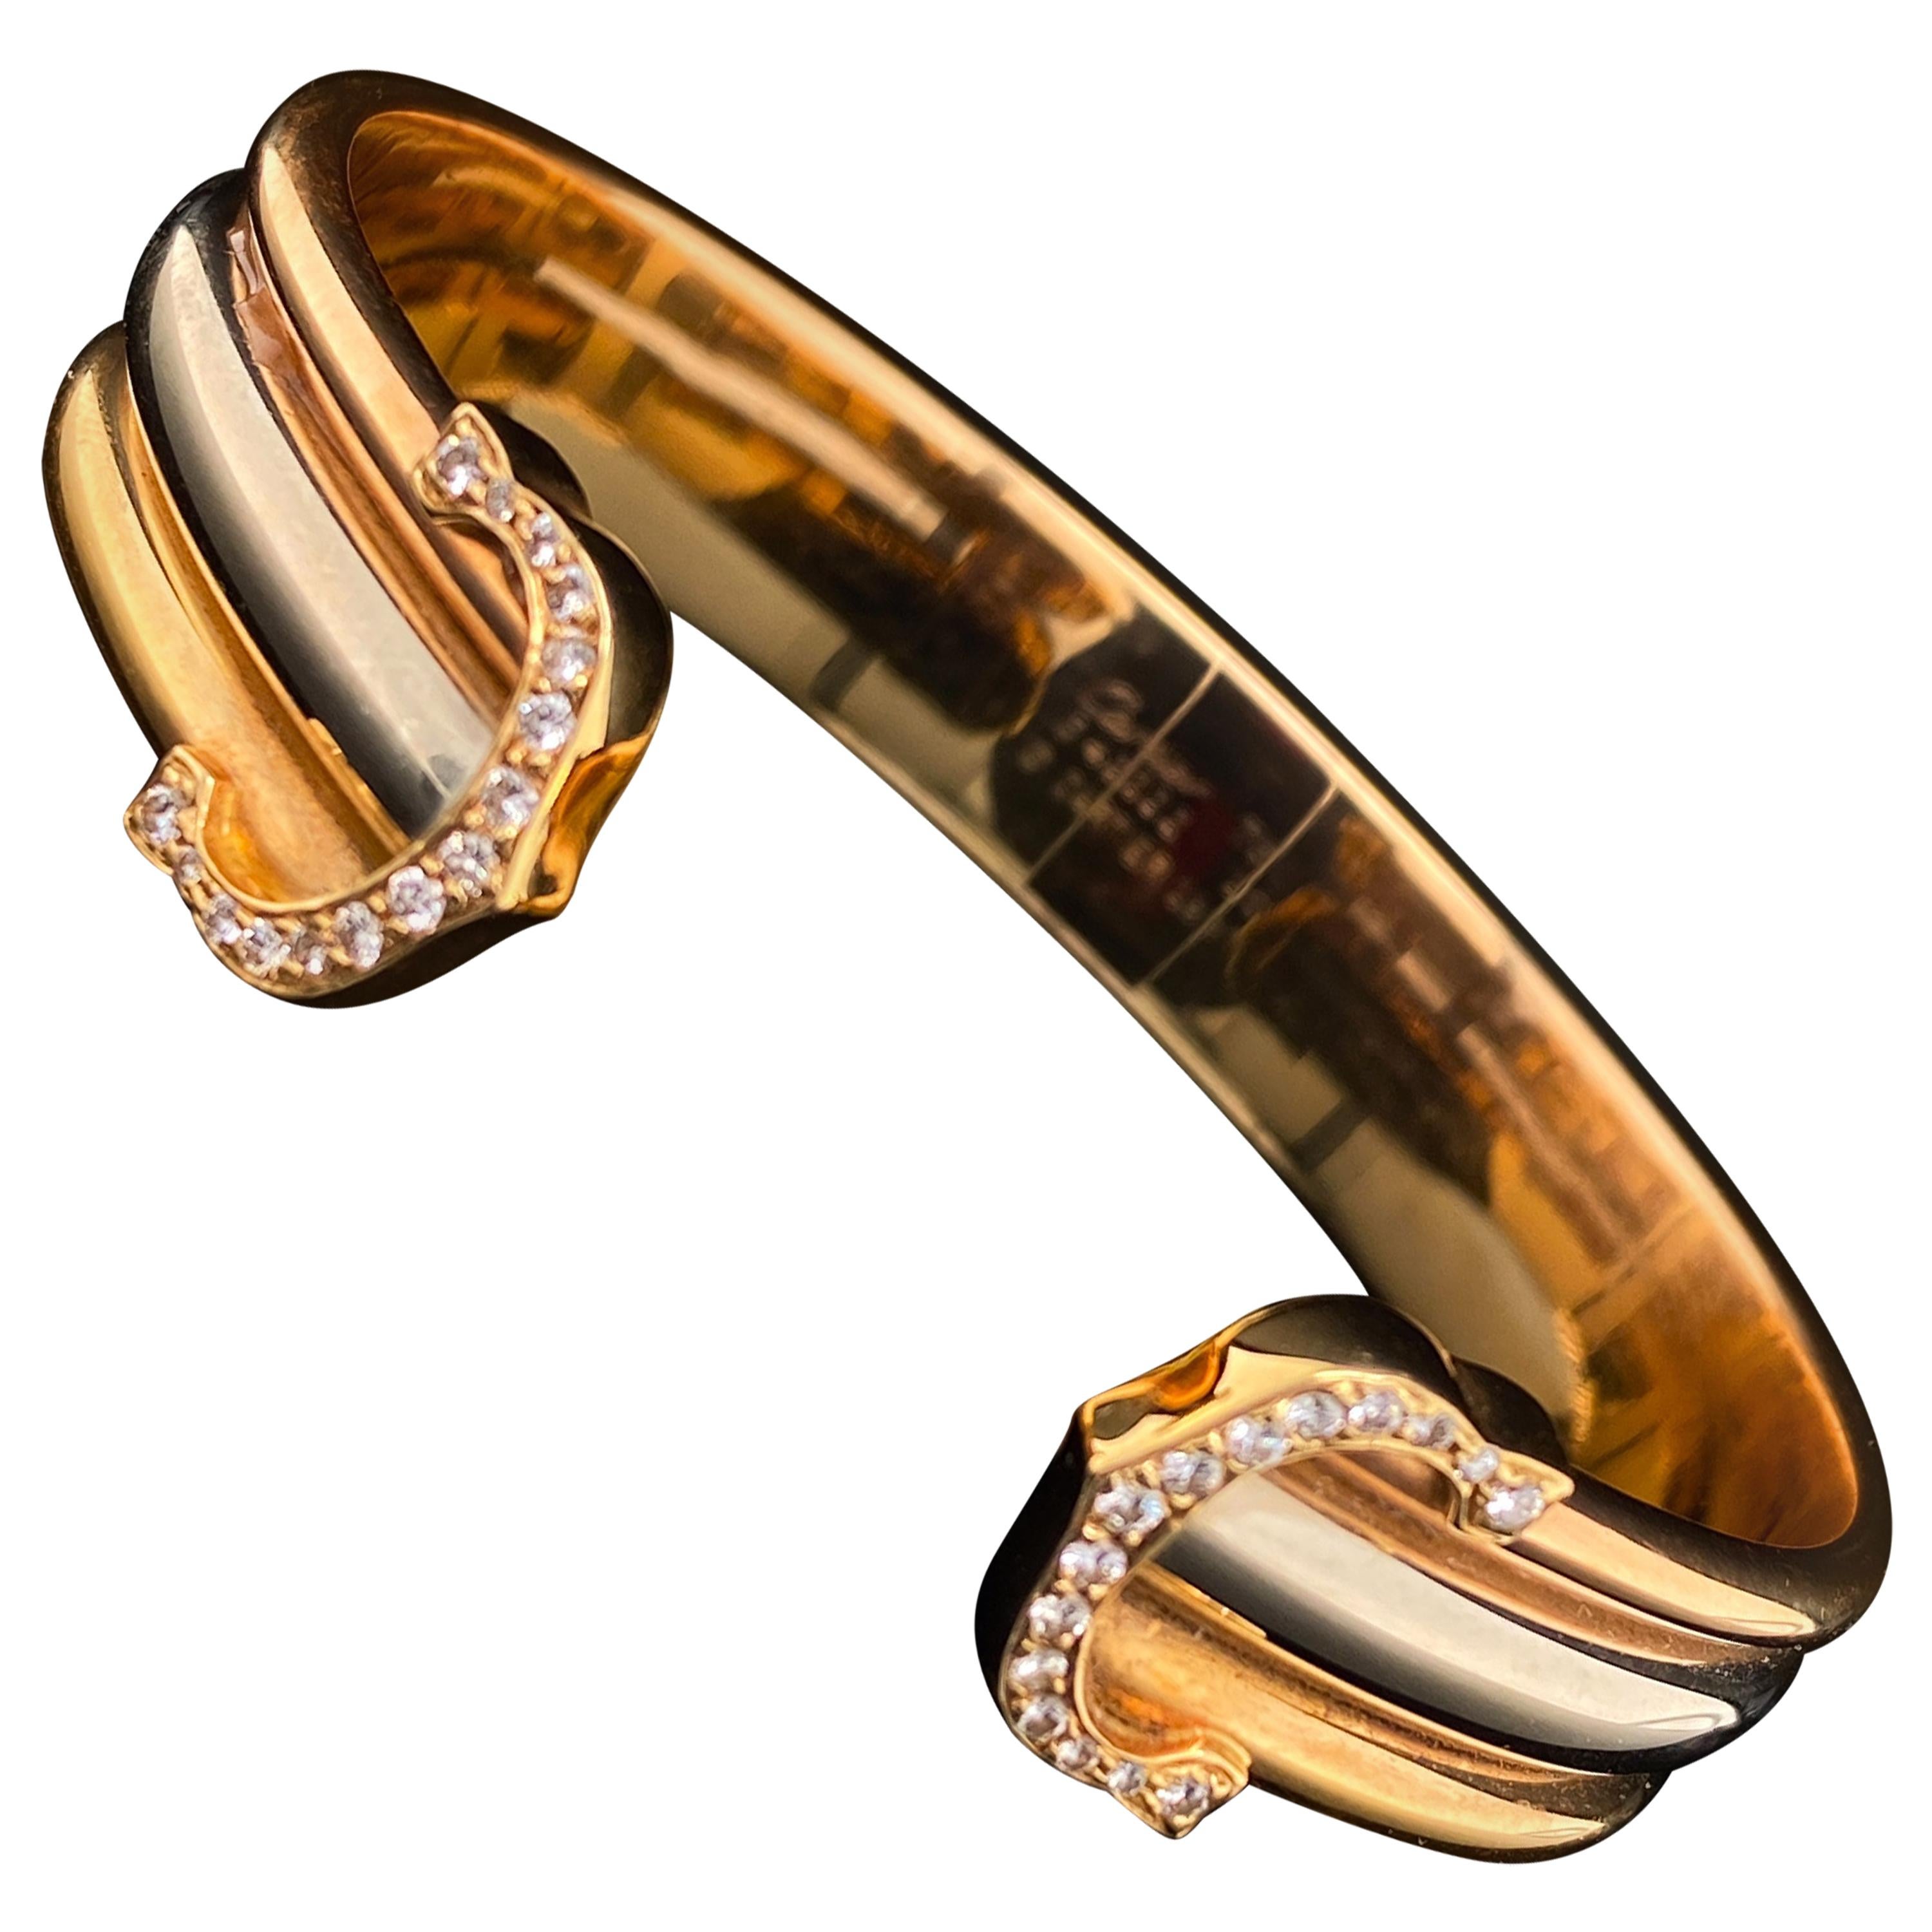 C De Cartier Cuff Bracelet in Yellow Gold with Paved Diamonds - Cartier  Bracelets - Cartier Jewelry